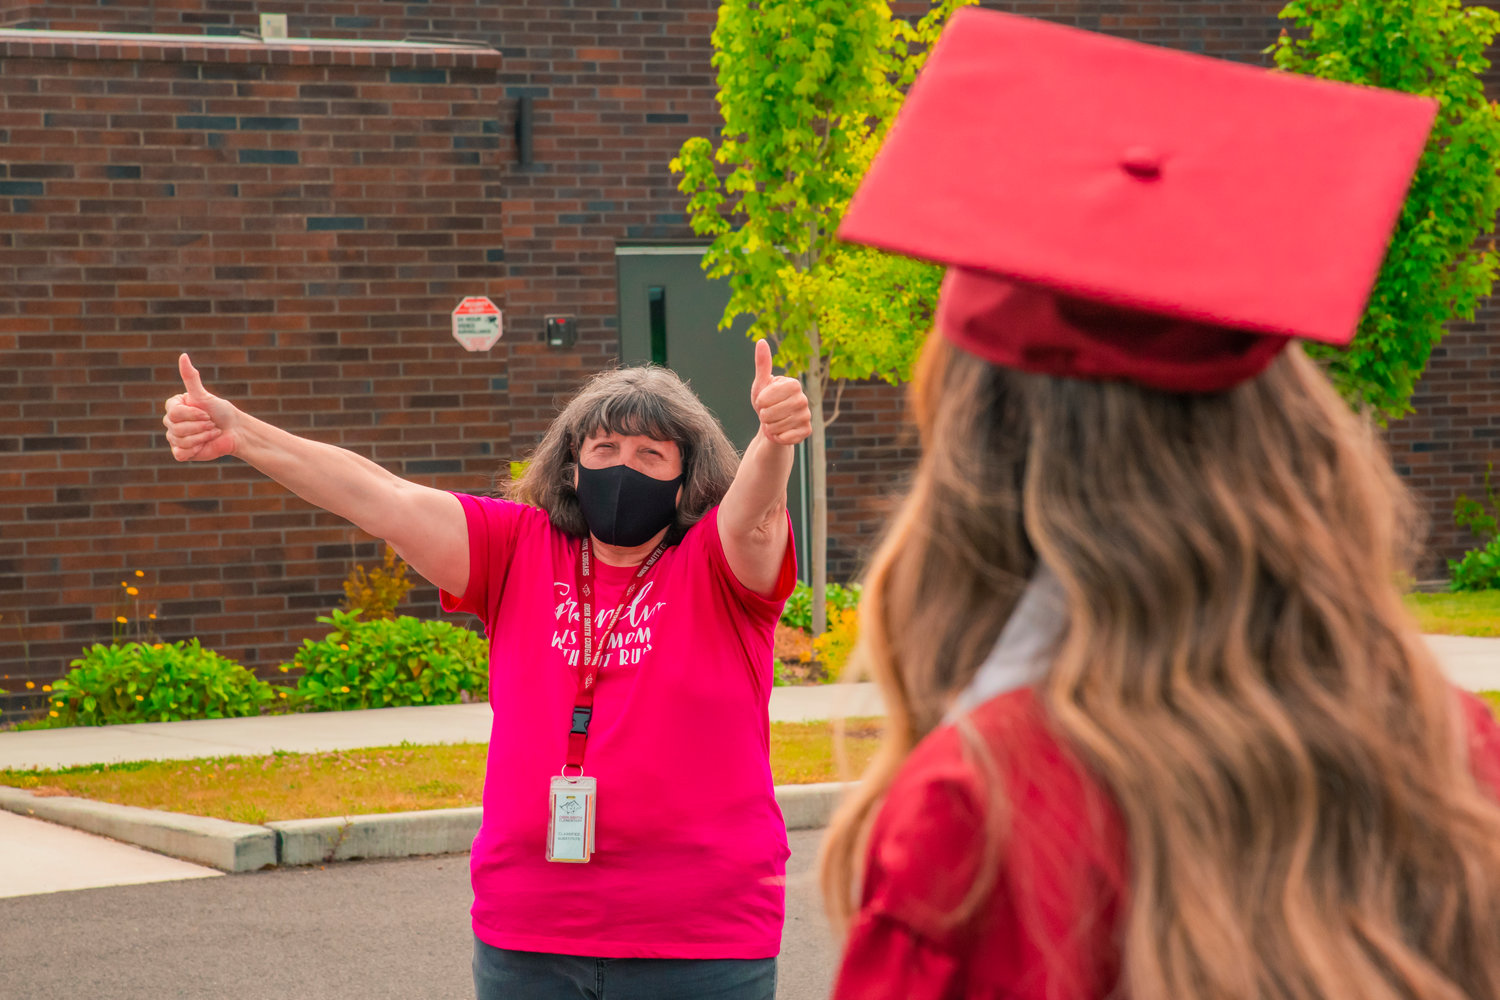 On Thursday morning, W.F. West seniors participated in the Senior Walk from W.F. West to Chehalis Middle School, James W. Lintott Elementary and Orin C Smith Elementary.